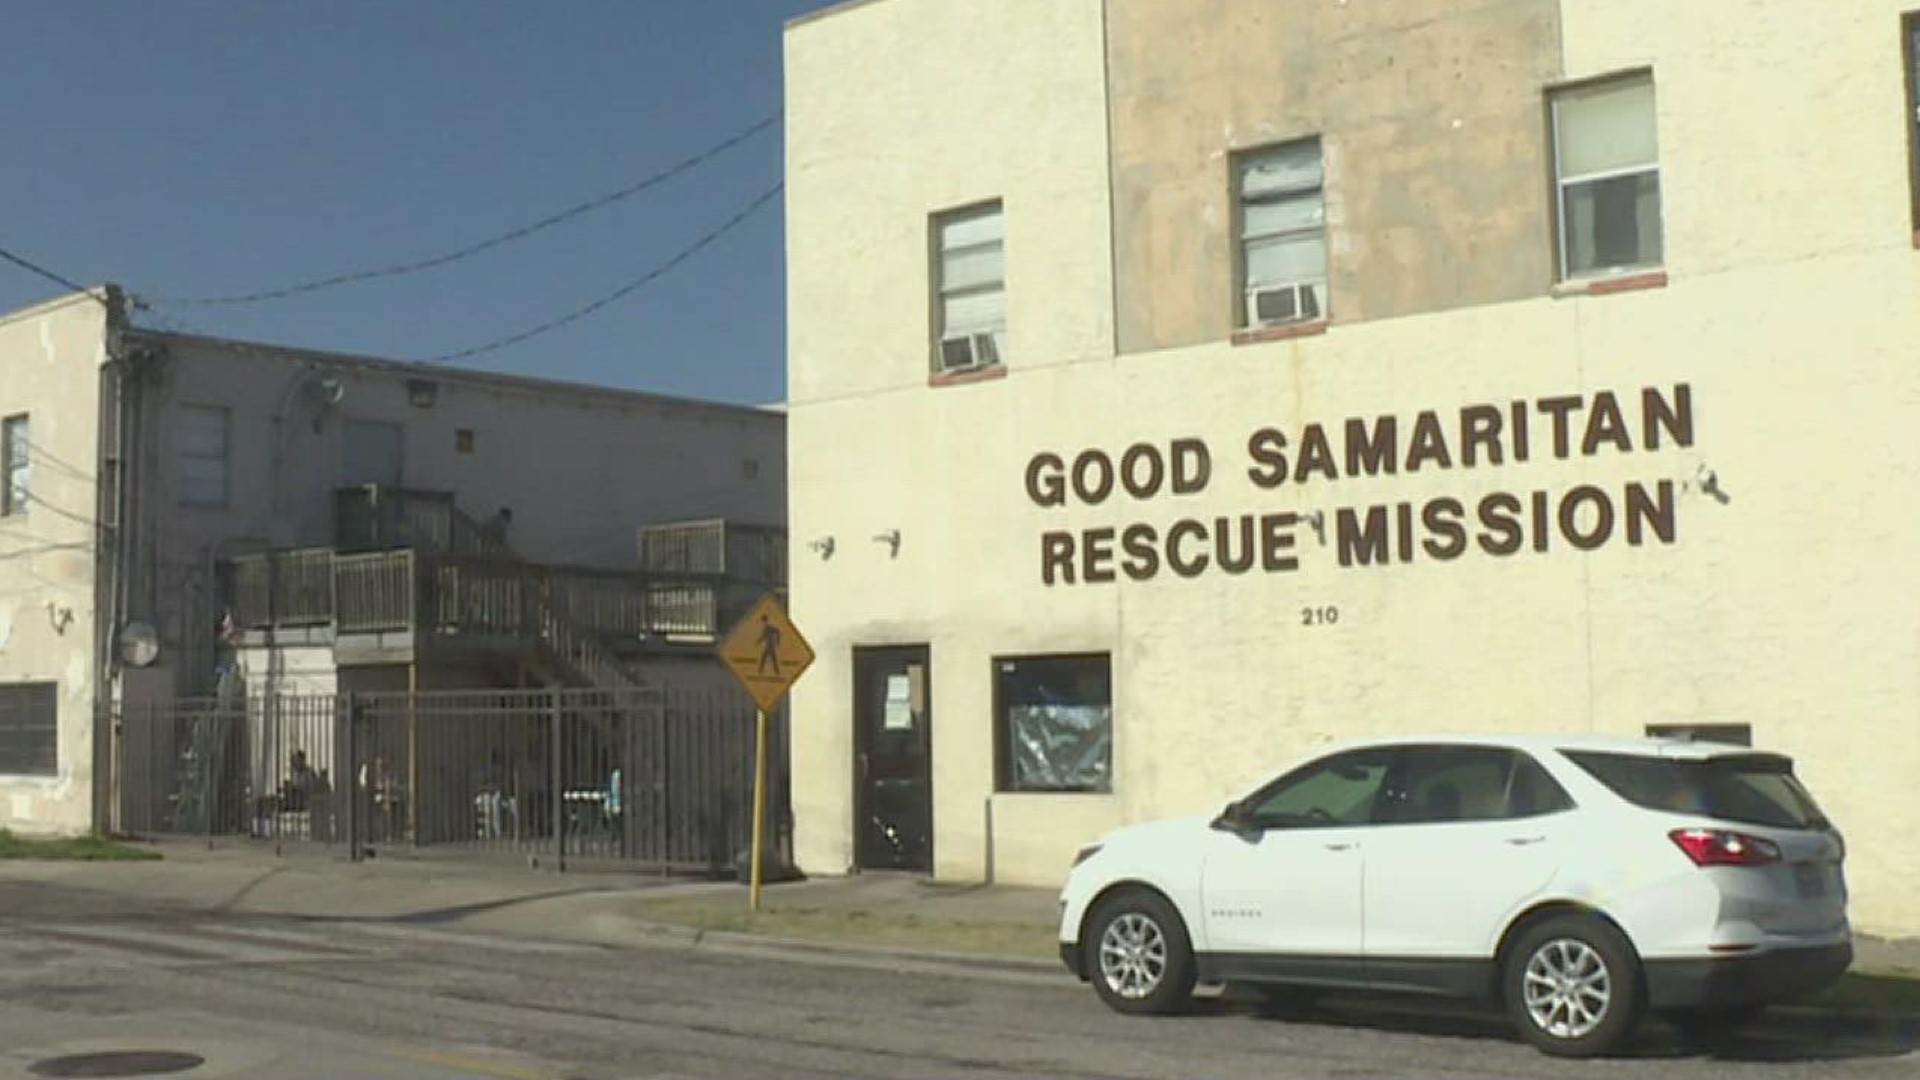 Despite the heat, the spirits of residents at Good Samaritan Rescue Mission remain high as temperatures rise.